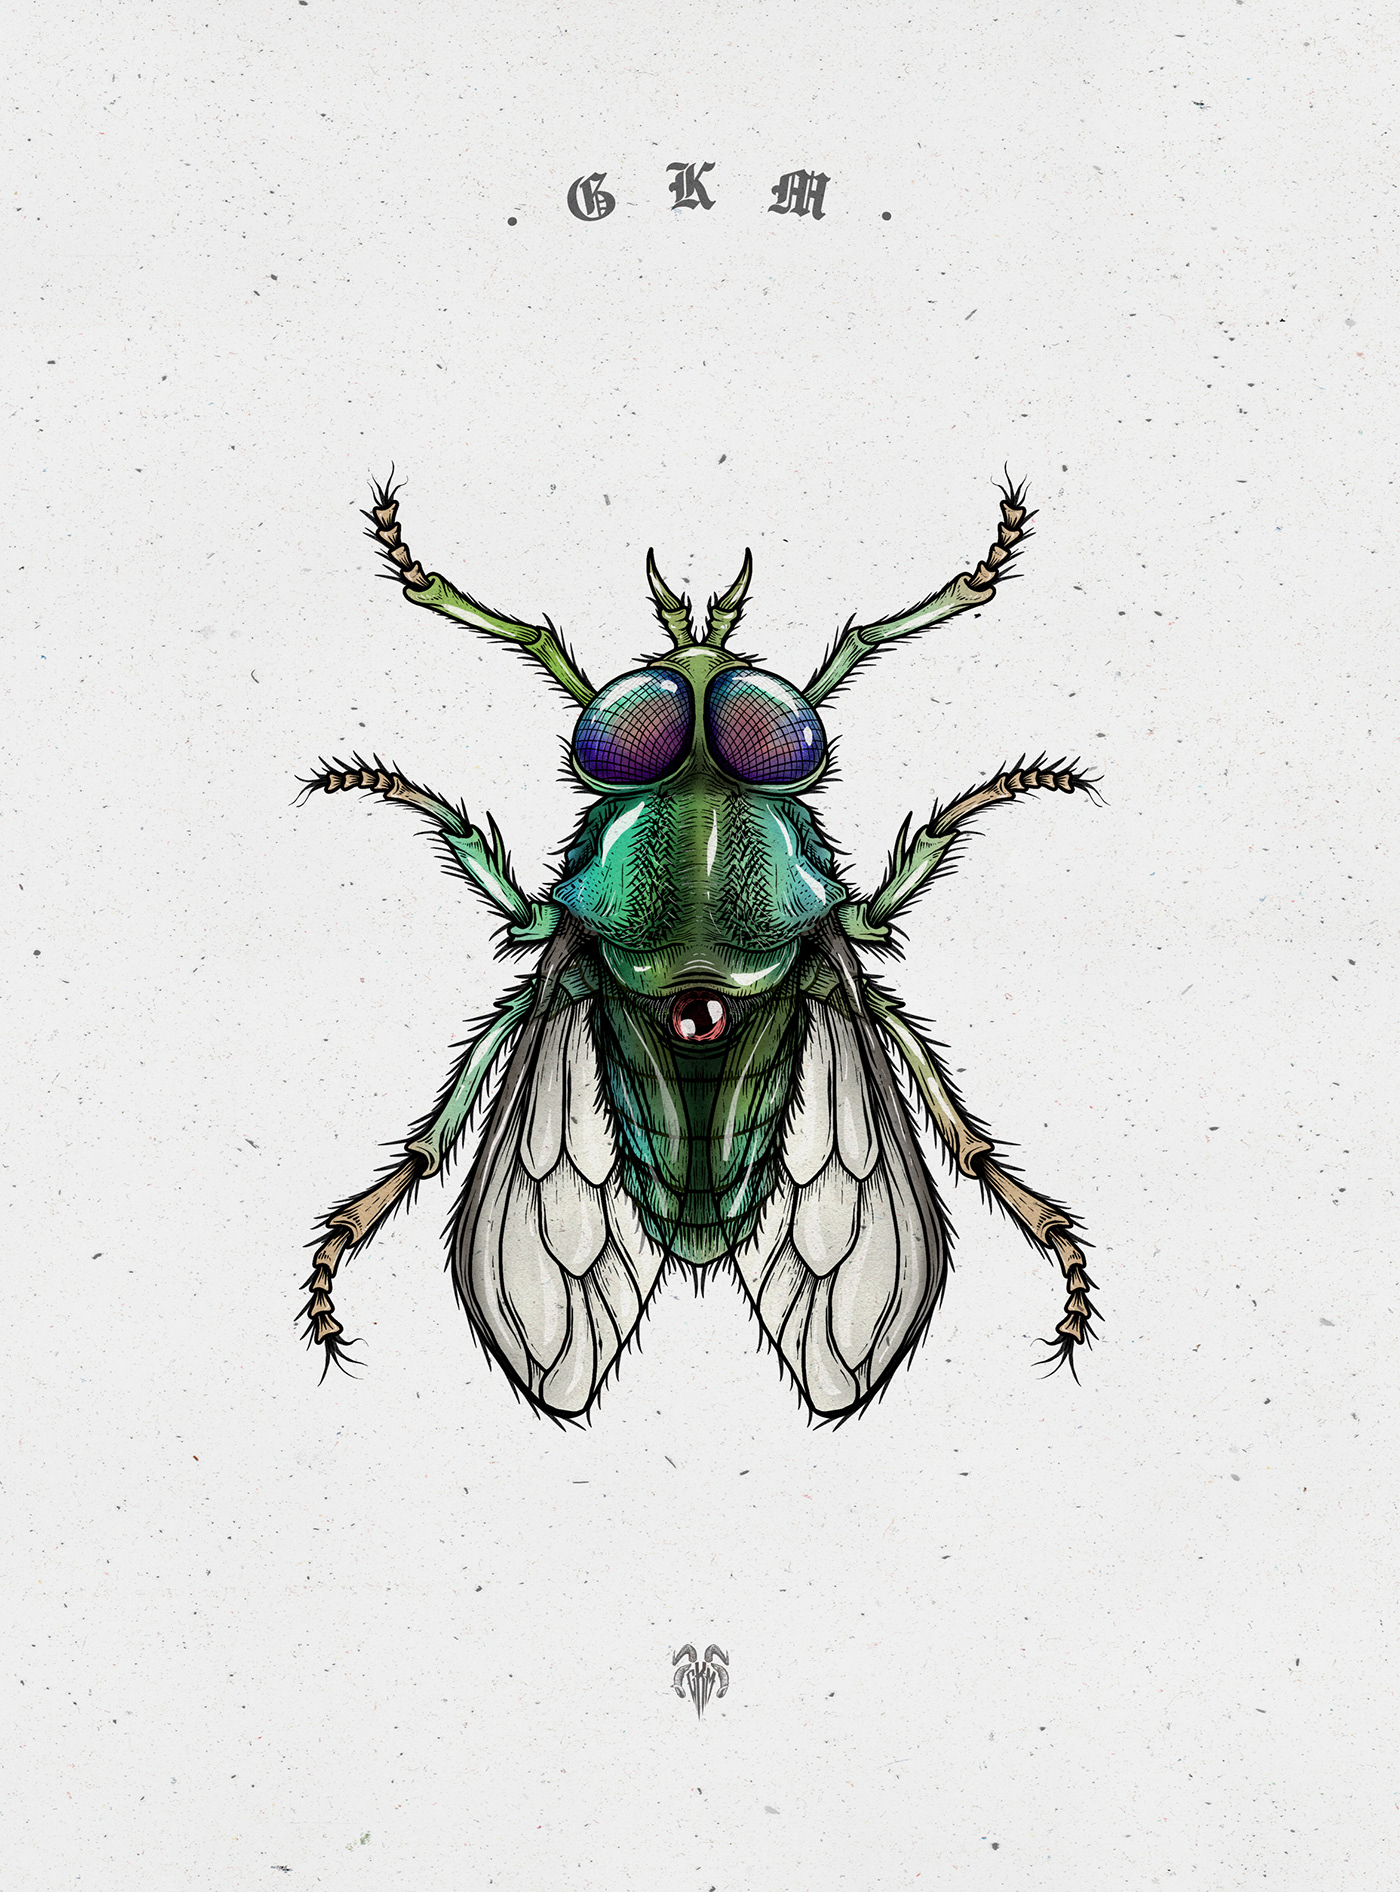 insectos Insects ilustracion ILLUSTRATION  Procreate color texture draw art GKM